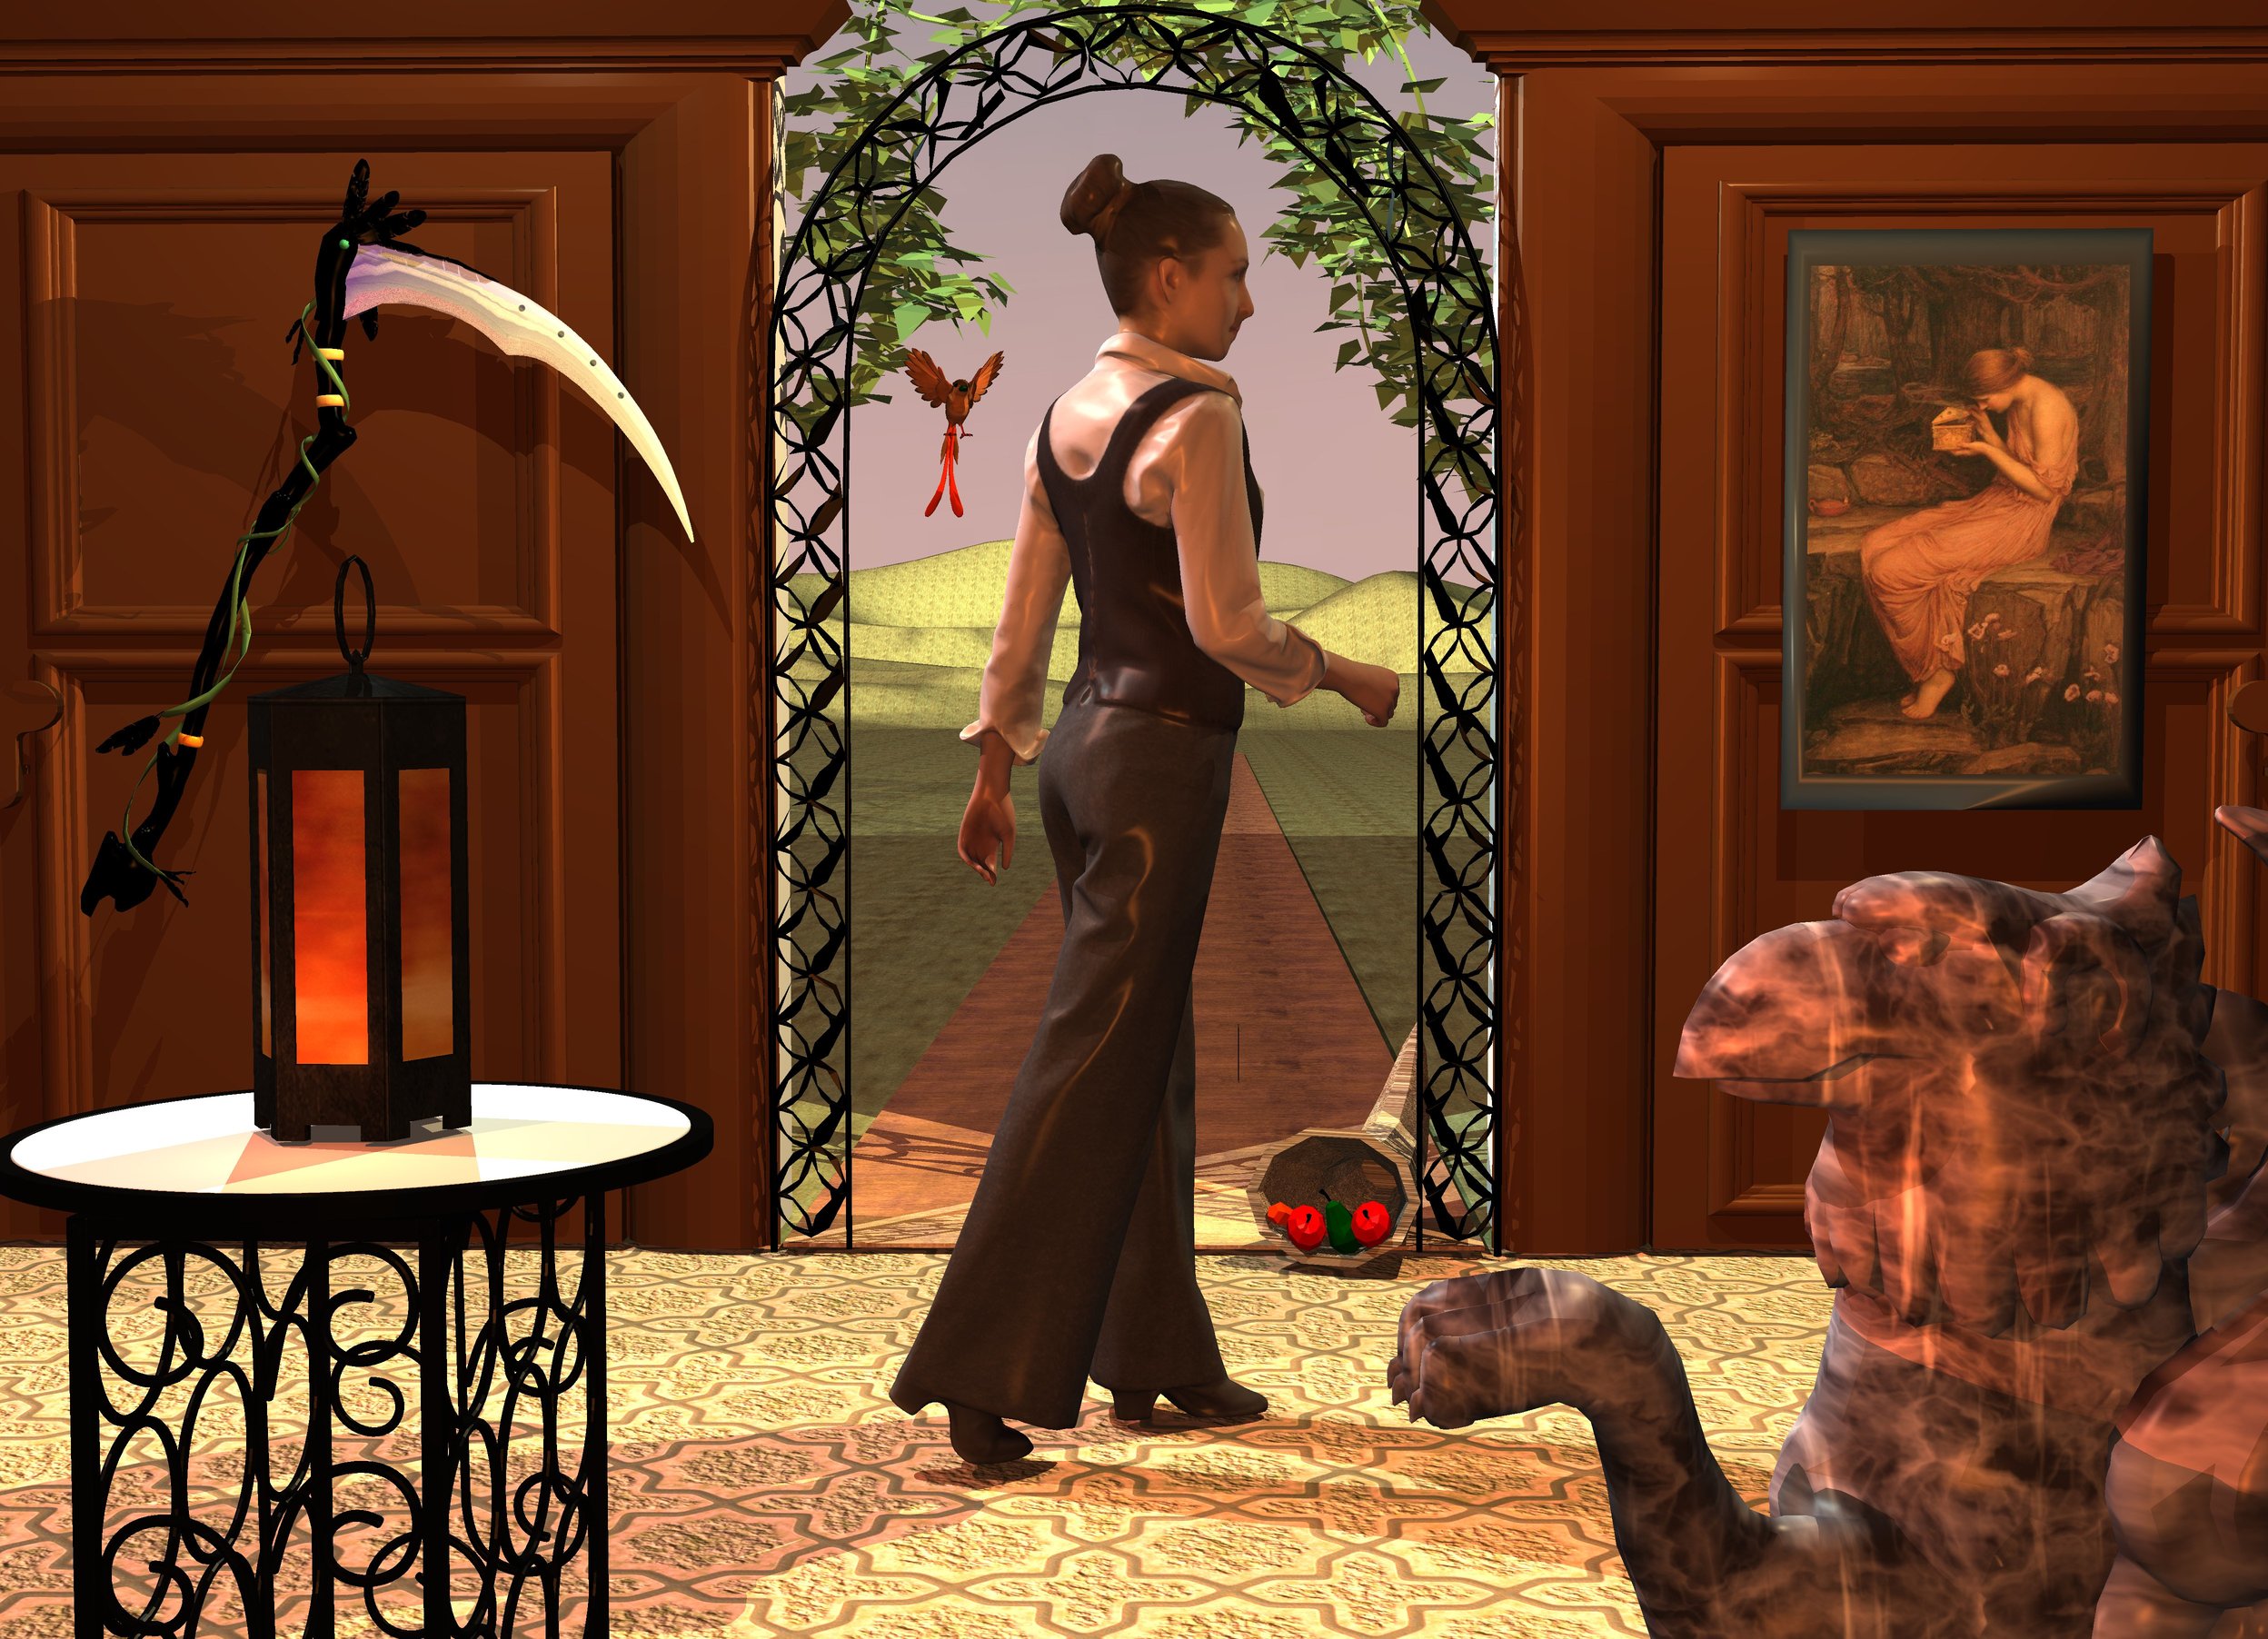 Input text: lantern is on table.  woman is 5 foot behind table and -1 foot to right. woman is facing northeast. 3 foot tall gryphon is 1.2 foot right of table and -0.5 foot to back. gryphon is facing back. gryphon is 1 foot wide [texture]. 7 foot tall black archway is 2 feet behind woman. first  7 foot tall and 10 foot wide  
mocha brown door  is -6 inch left of archway. second 7 foot tall and 10 foot wide mocha brown door is -6 inch right of archway. 7 foot tall and 10 foot wide mocha brown first wall is -1 inch behind first door and -9.5 foot to left. 7 foot tall and 10 foot wide mocha brown second wall is -1 inch behind second door and -9.5 foot to right. 40 foot wide floor is -6 inch in front of archway and -1.3 inch above ground. floor is  5 foot wide dark  [texture]. ground is 10 foot wide [texture]. 4 foot deep and 100 foot long square is -1 inch behind archway. square is facing left. square is 3.5 foot wide [texture]. 6 foot wide  pistachio green common ivy is 1 inch behind archway and 2.5 foot in archway. common ivy is -4.8 feet to right. [texture] bird  is -16 inch left of archway and 12  inch behind archway.  bird is 4.3 feet above ground. bird is facing gryphon. cornucopia is -10 inch behind archway and -18 inch to right. cornucopia is facing woman. cornucopia's horn is [fabric]. [painting] painting is -4.5 inch in front of second door and -4.05 feet to left. painting is 2.55 feet above ground. 4.5 foot tall scythe is -4 inch in front of first door and -4.6  feet to right. scythe is 1 feet above ground. scythe is facing back.  scythe's handle is black. scythe's leaf is black. scythe's blade is shiny. scythe is leaning 25 degrees to right. sun is cinnamon brown. camera light is old gold. powder blue light is 1 foot in front of archway and 7 foot above ground. light is 1 foot to left. sand gold light is 1 foot in front of archway and 7 foot above ground. light is 1 foot to right. tiny terracotta light is in front of lantern.